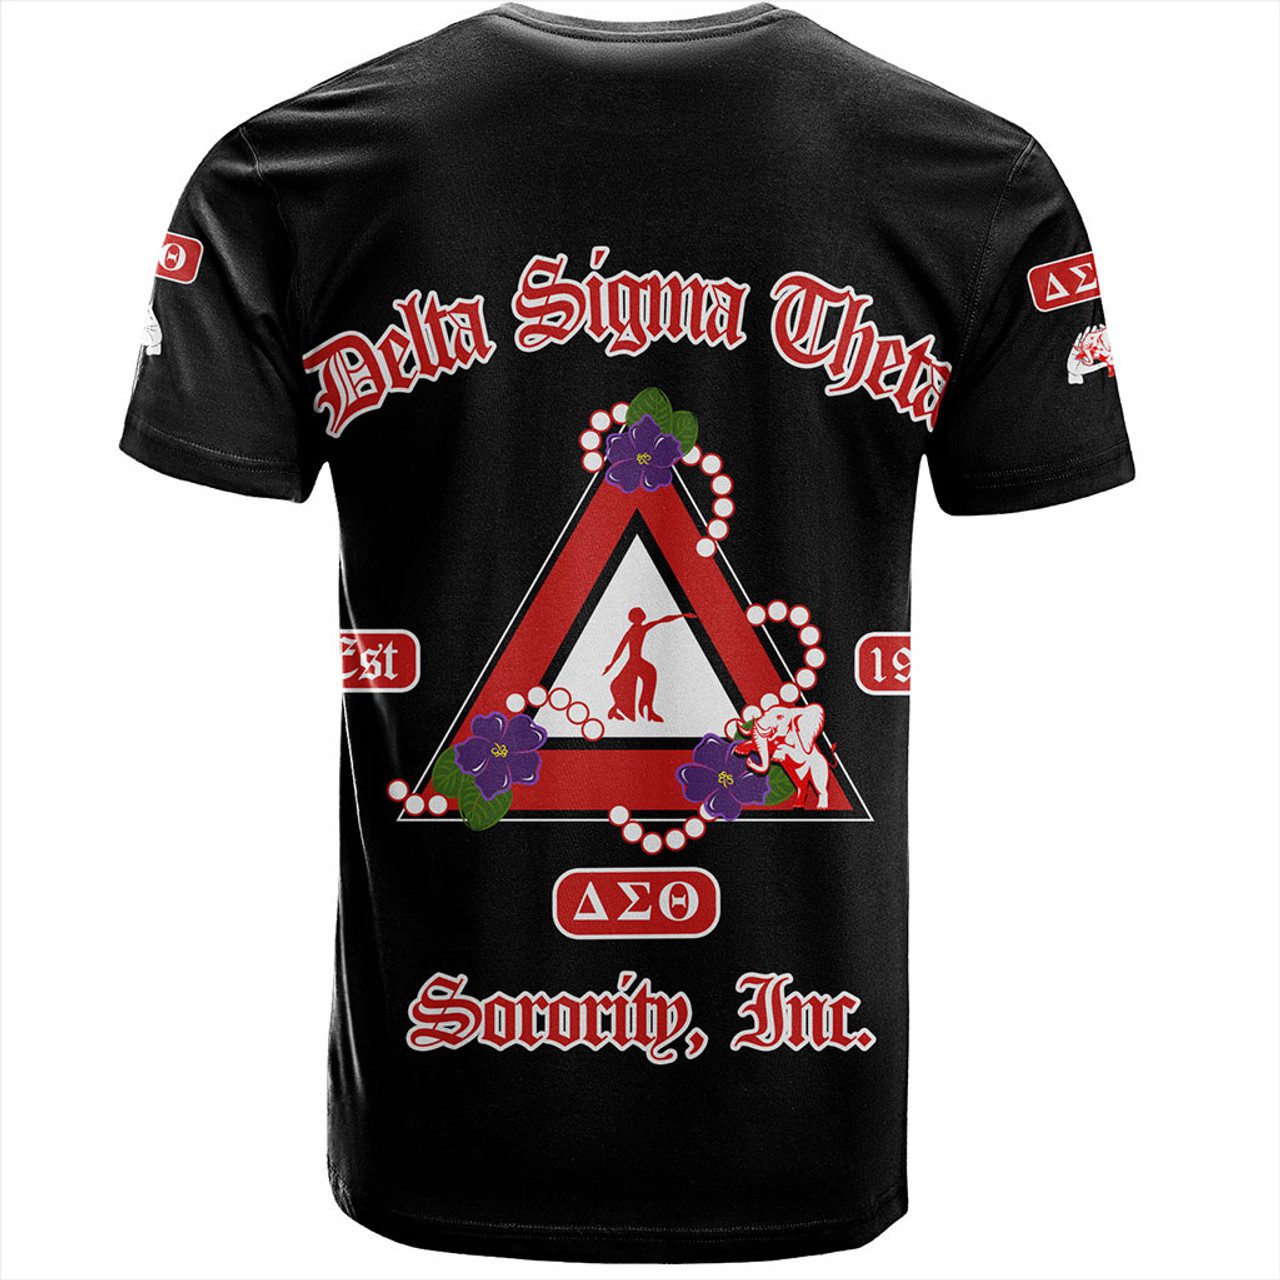 Delta Sigma Theta T-Shirt Sorority Pearl And Violet Flower